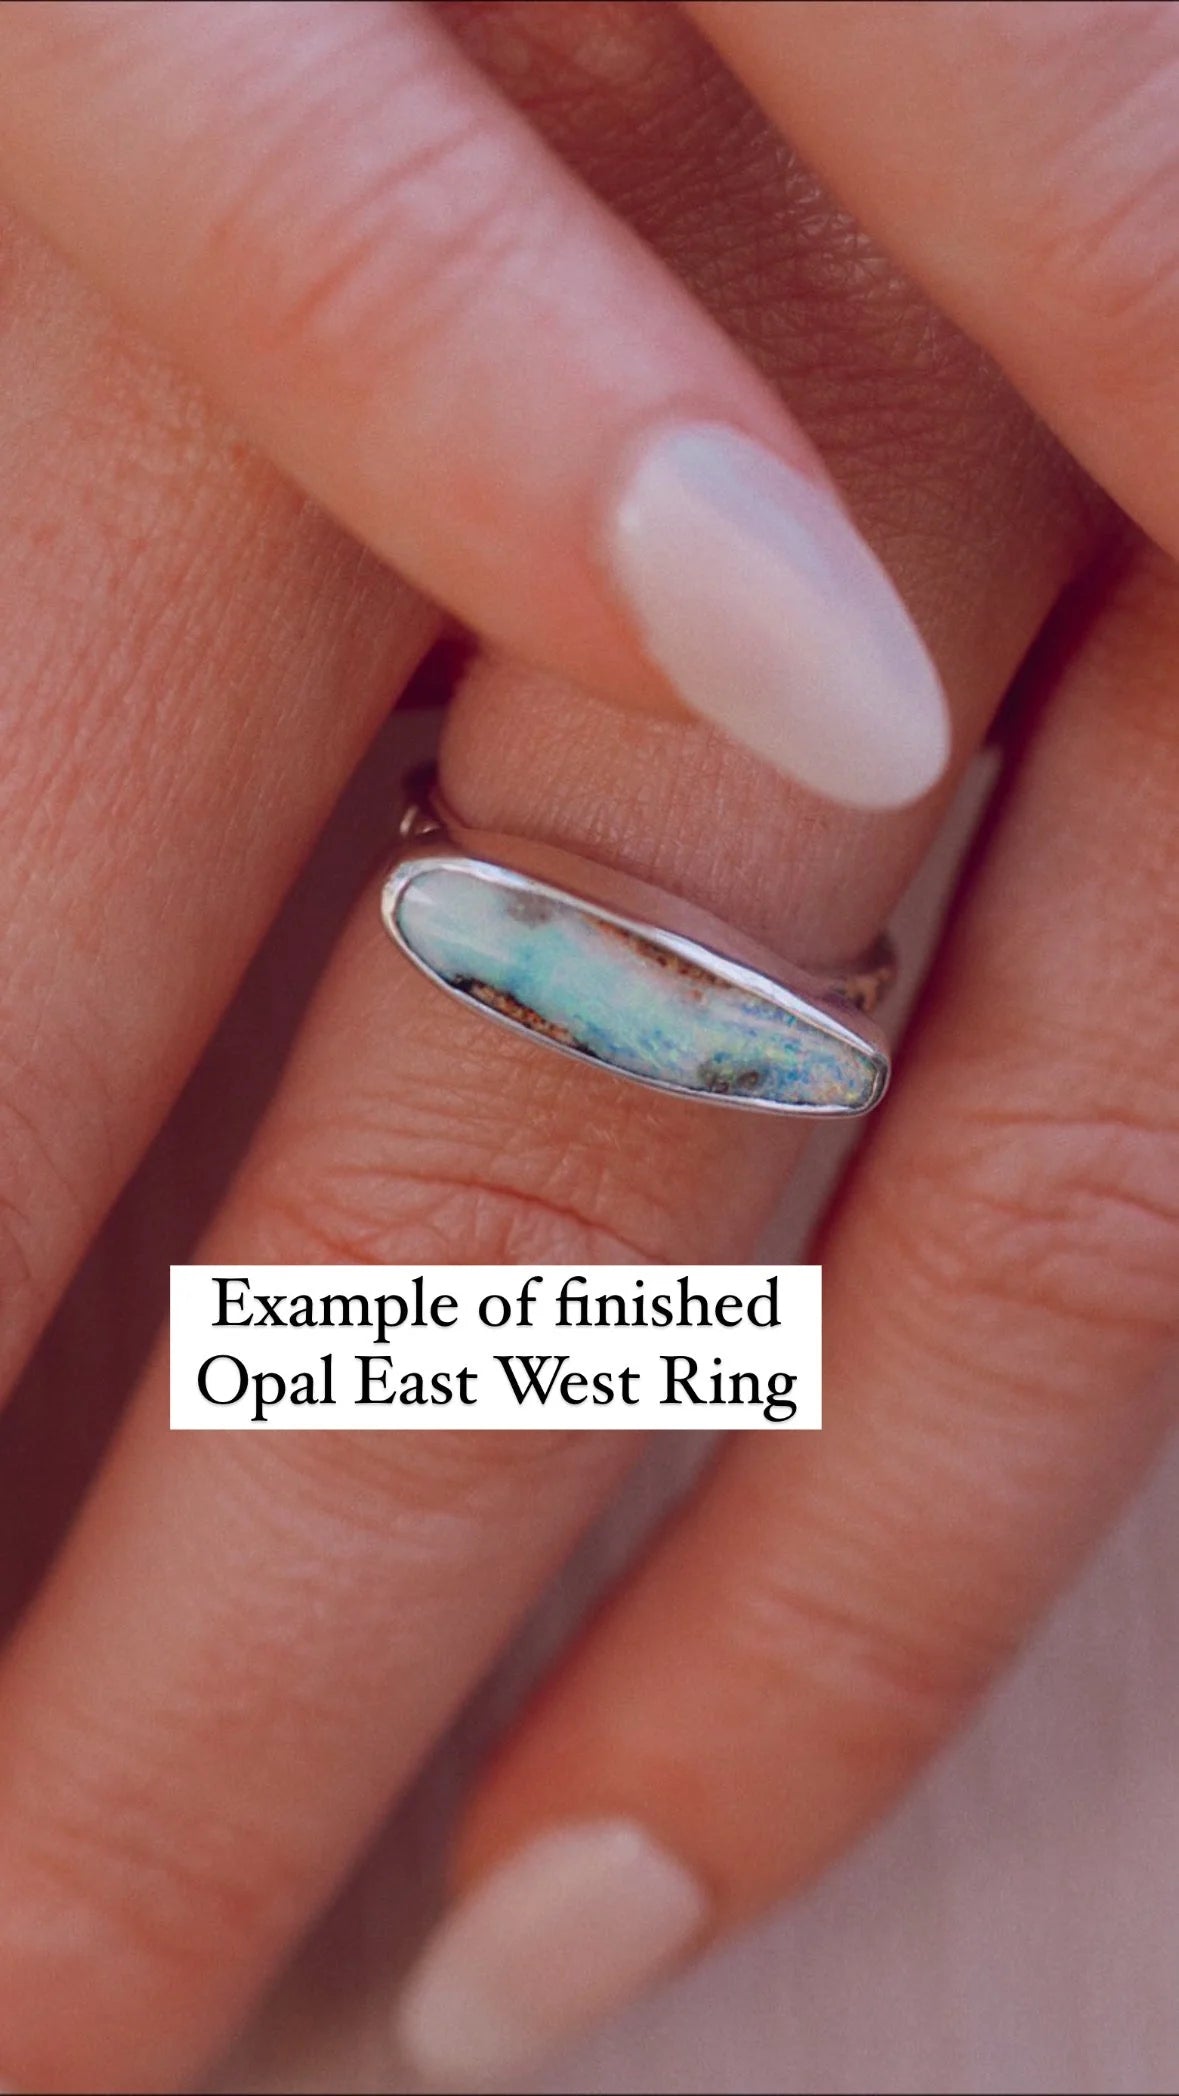 Opal East West Ring #10 ◇ Australian Opal ◇ Made in your size.